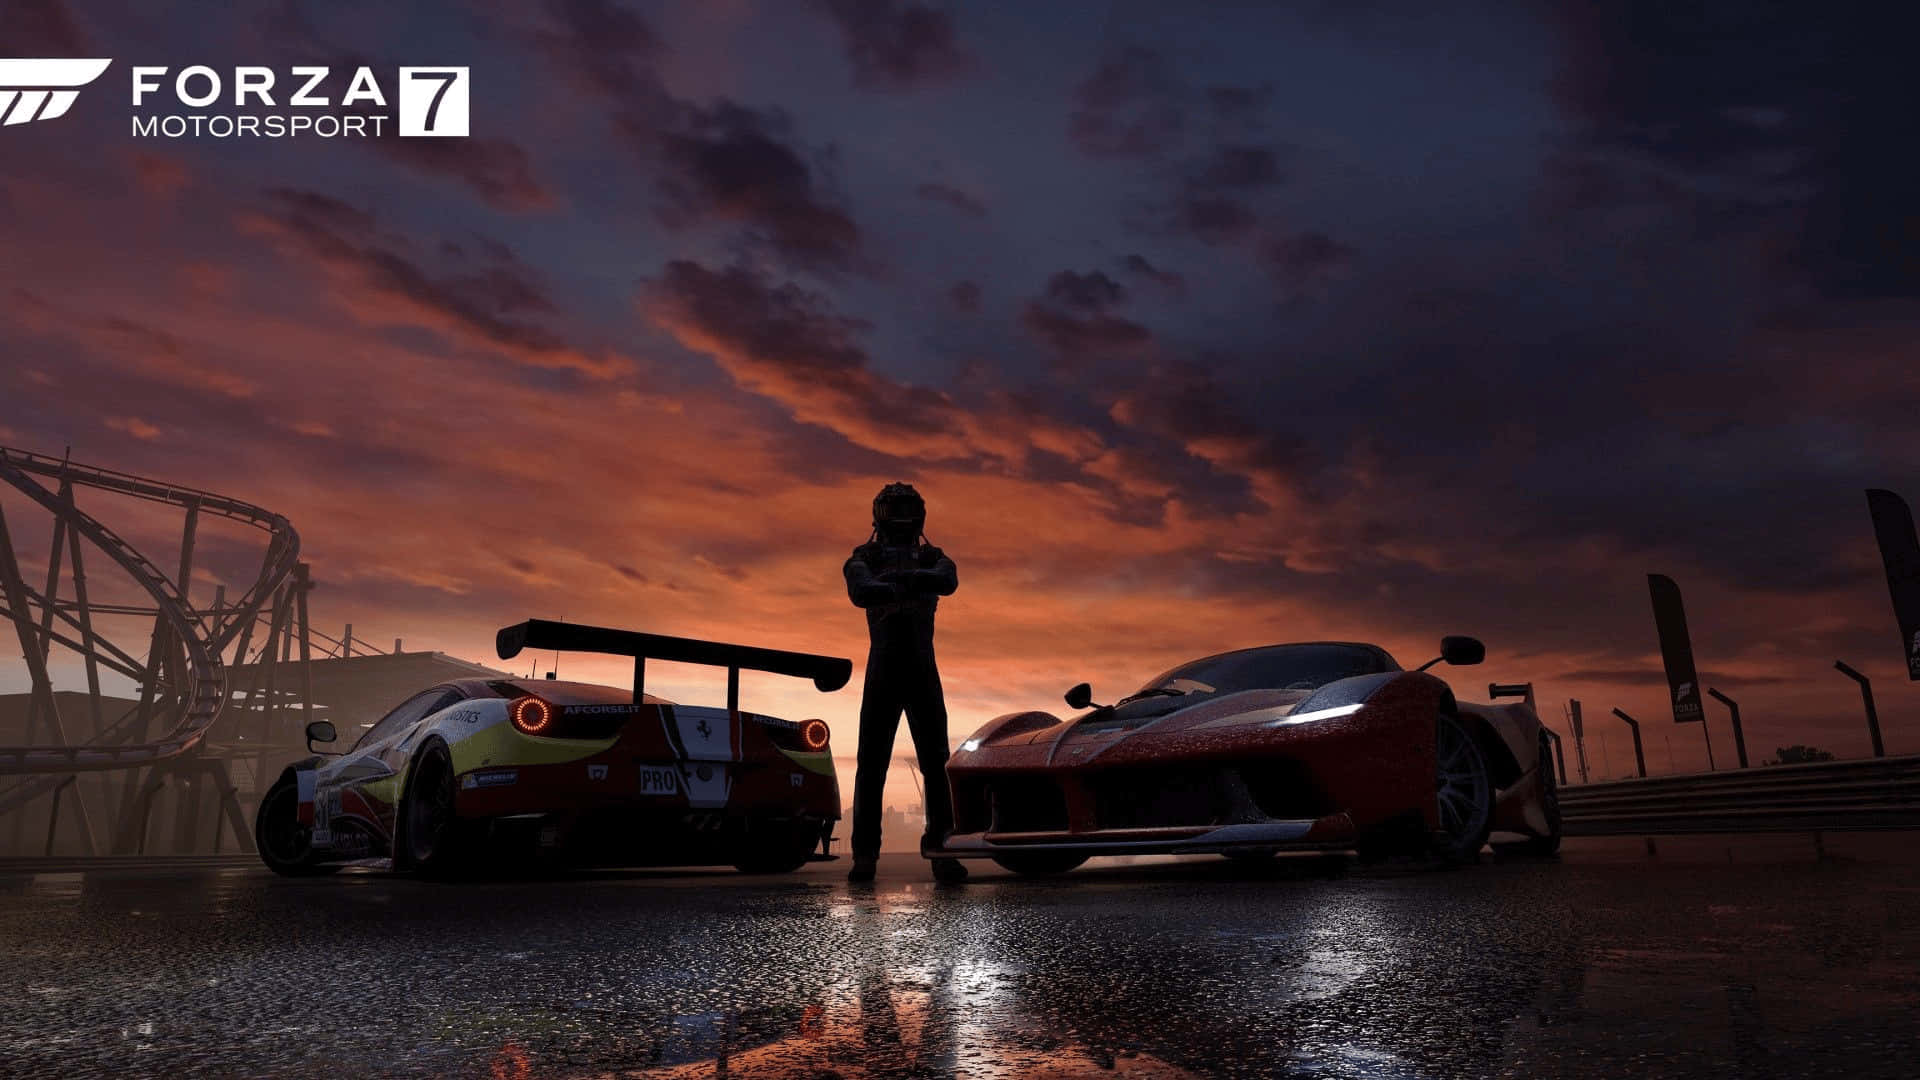 Experience the Excitement of Forza Motorsport 7 in Stunning 1080p